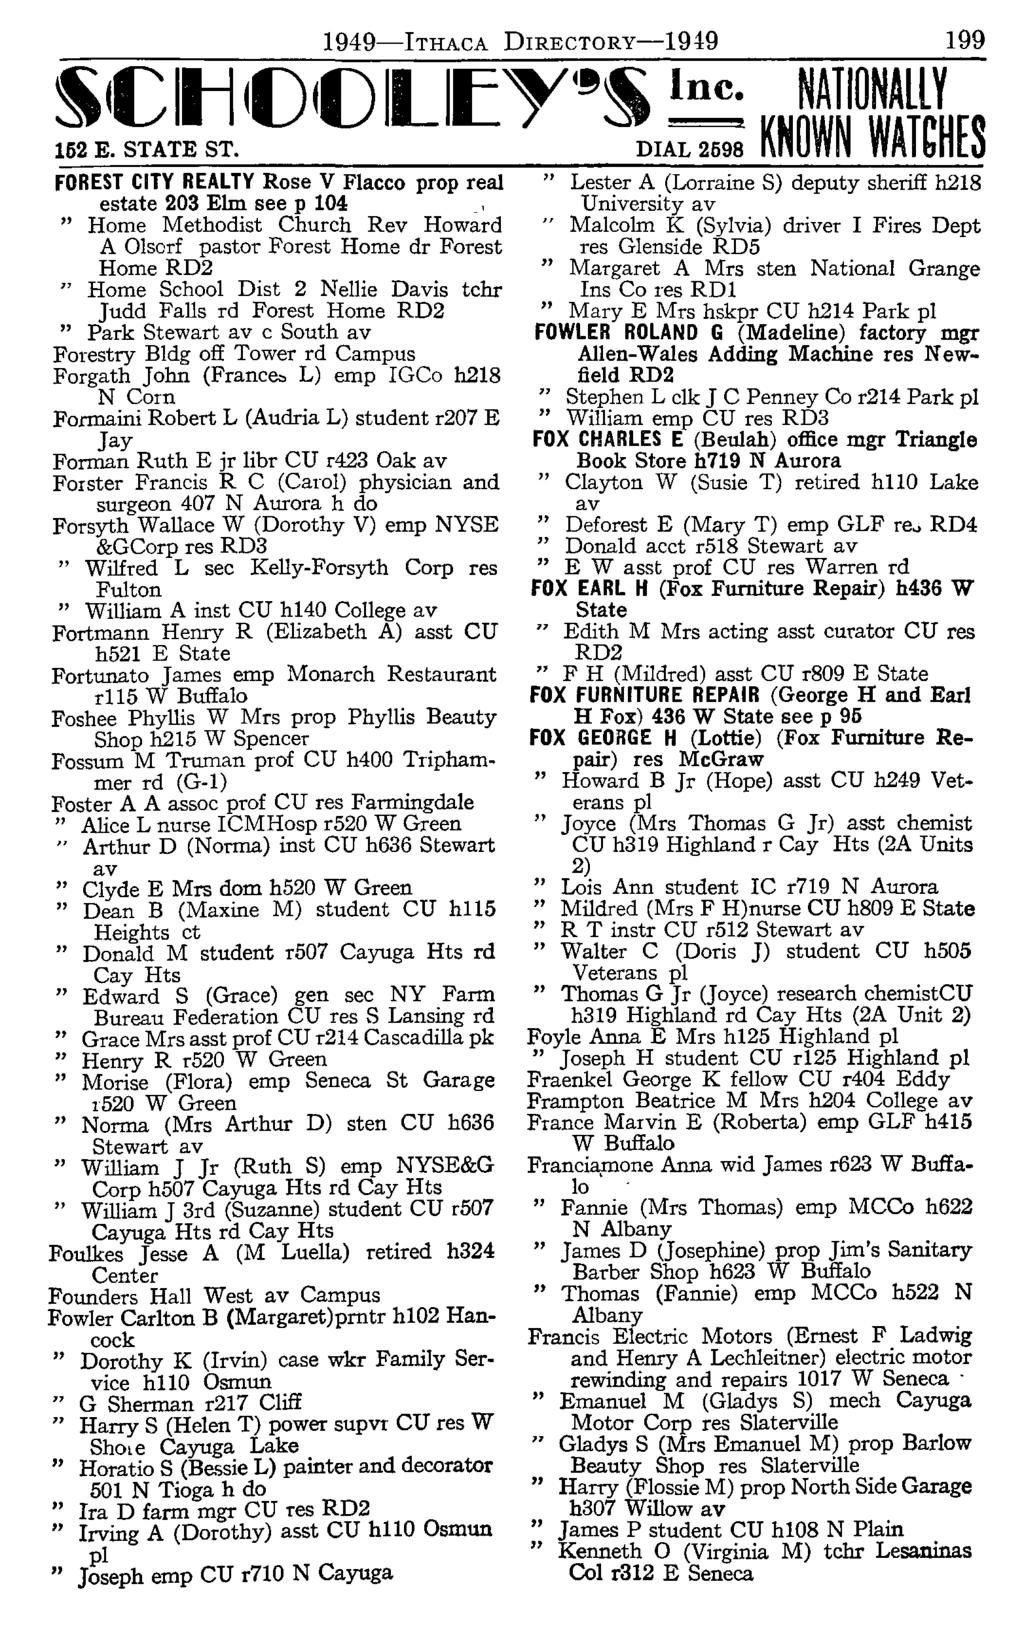 1949-lTHAcA DIRECTORy-1949 199 FOREST CITY REALTY Rose V Fiacco prop real estate 203 Elm see p 104.